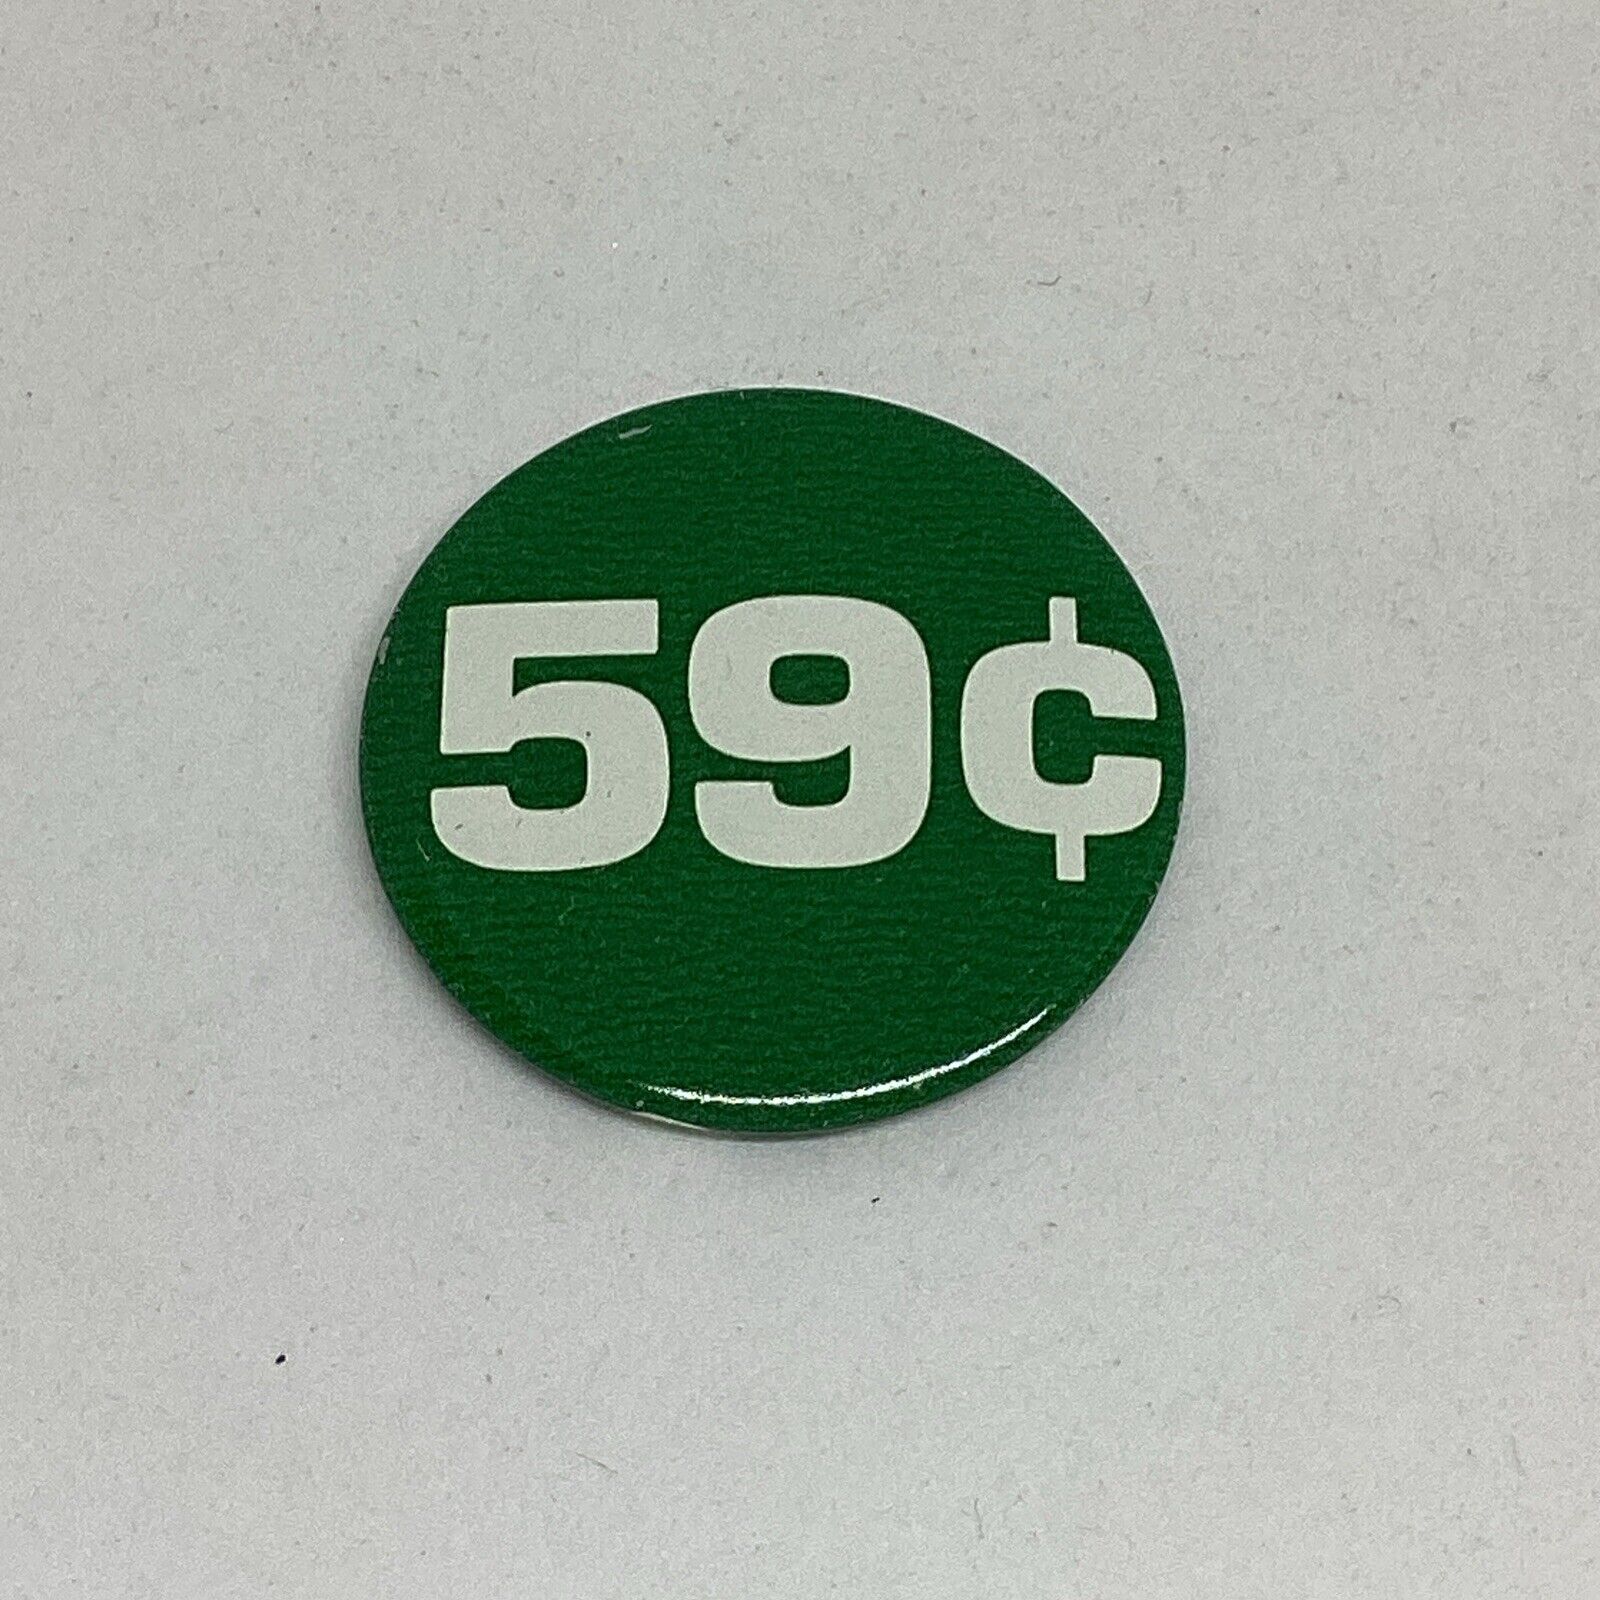 Vintage “59¢” Gender Pay-Wage Gap Women’s Rights Button